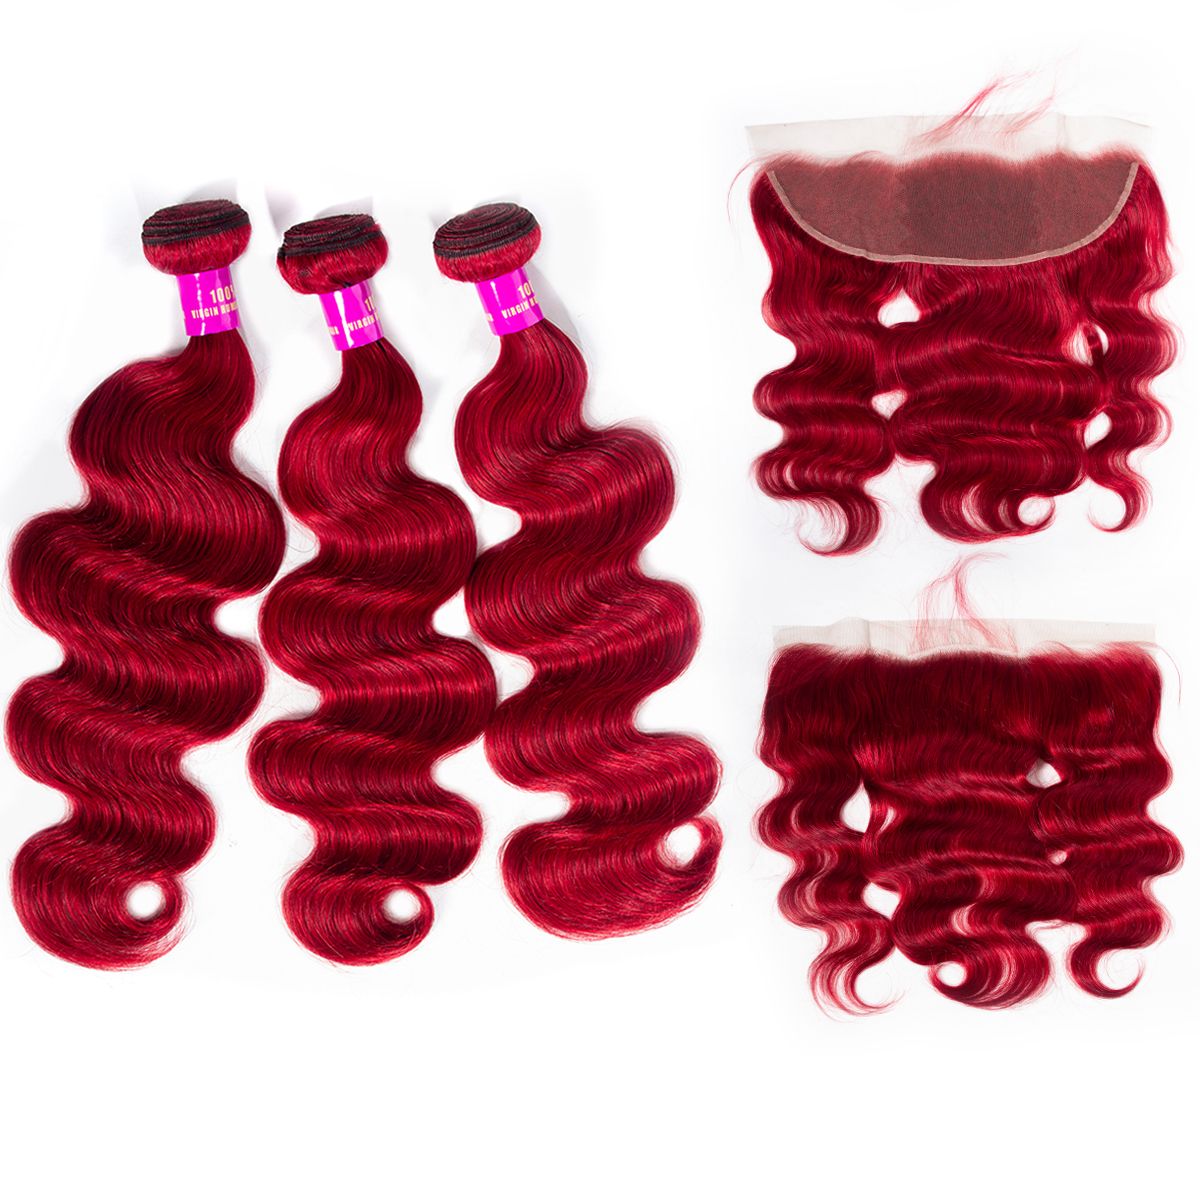 Red Body Wave Bundles with 13×4 Lace Frontal Virgin Human Hair